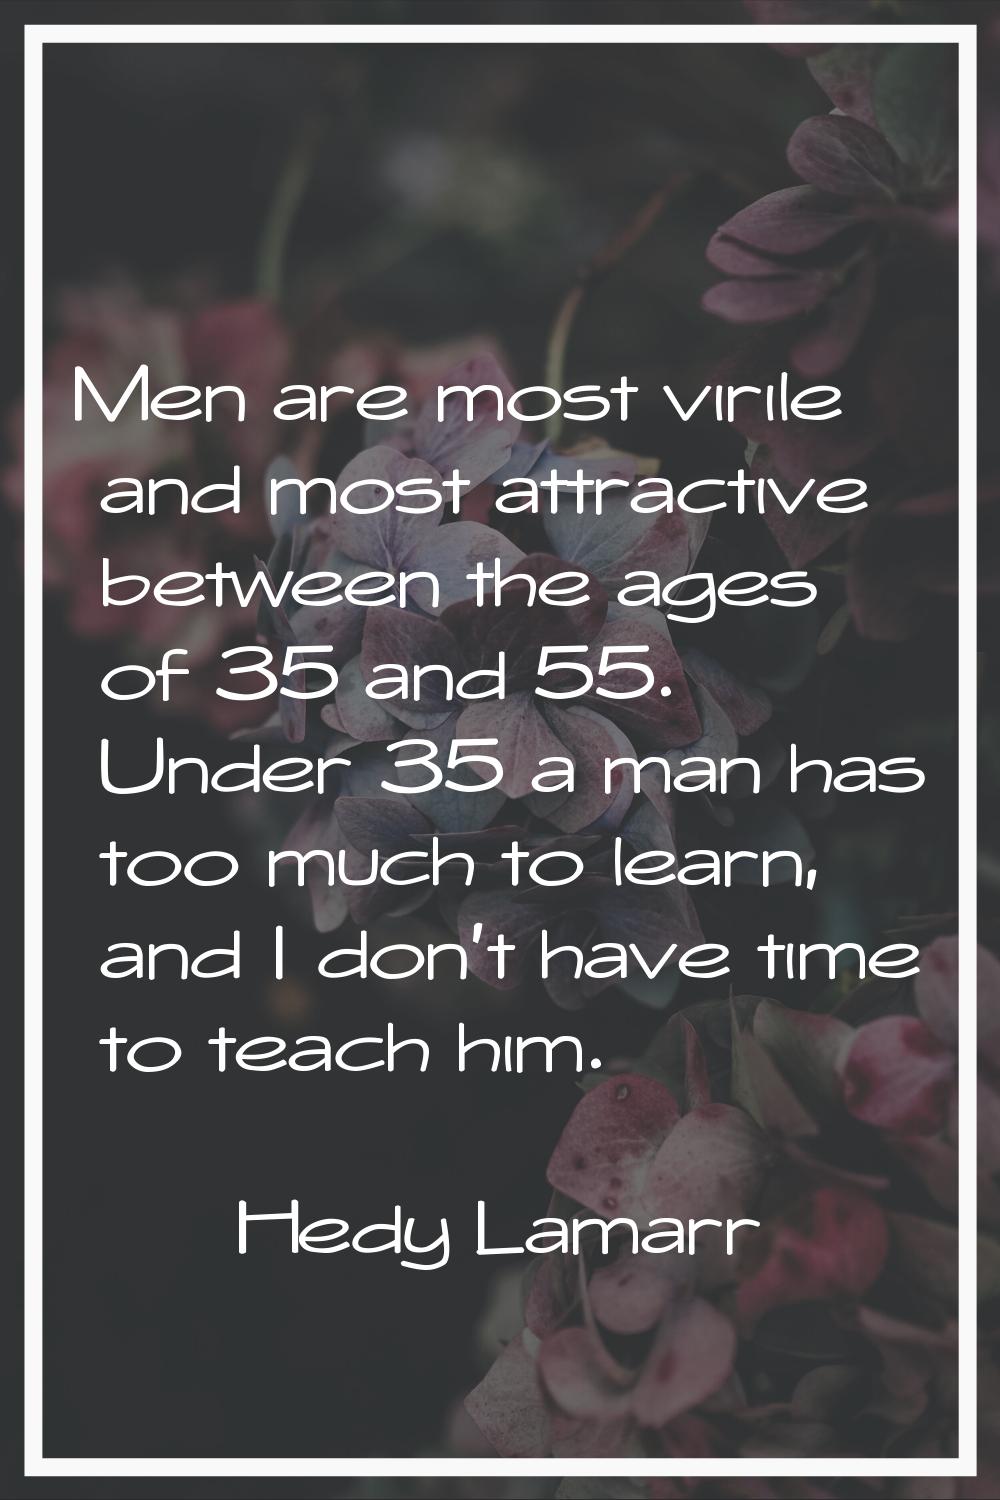 Men are most virile and most attractive between the ages of 35 and 55. Under 35 a man has too much 